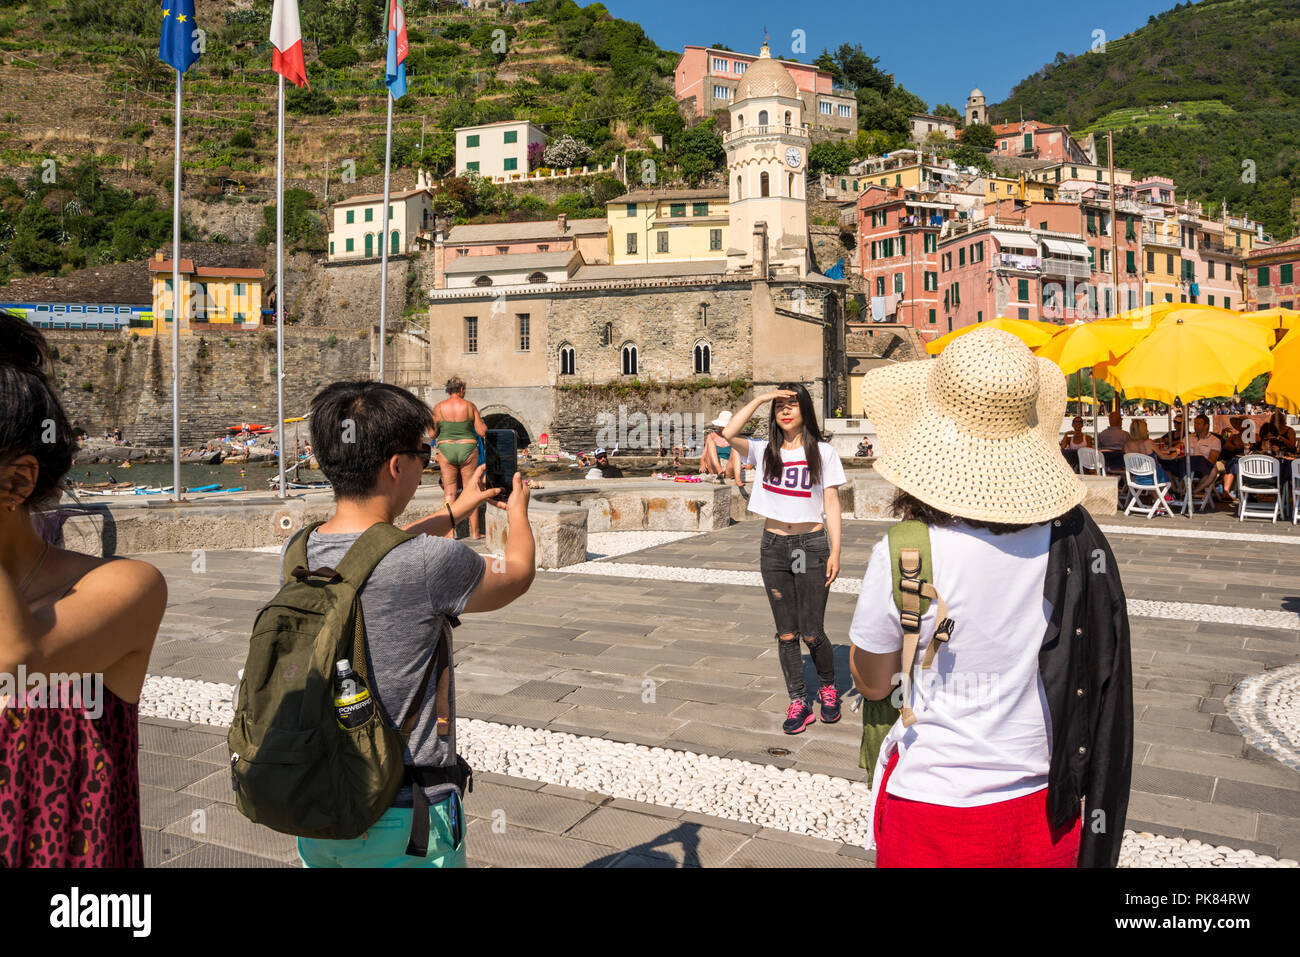 Tourists taking photos, Vernazza, one of Cinque Terre 5 villages, Liguria, Italy Stock Photo